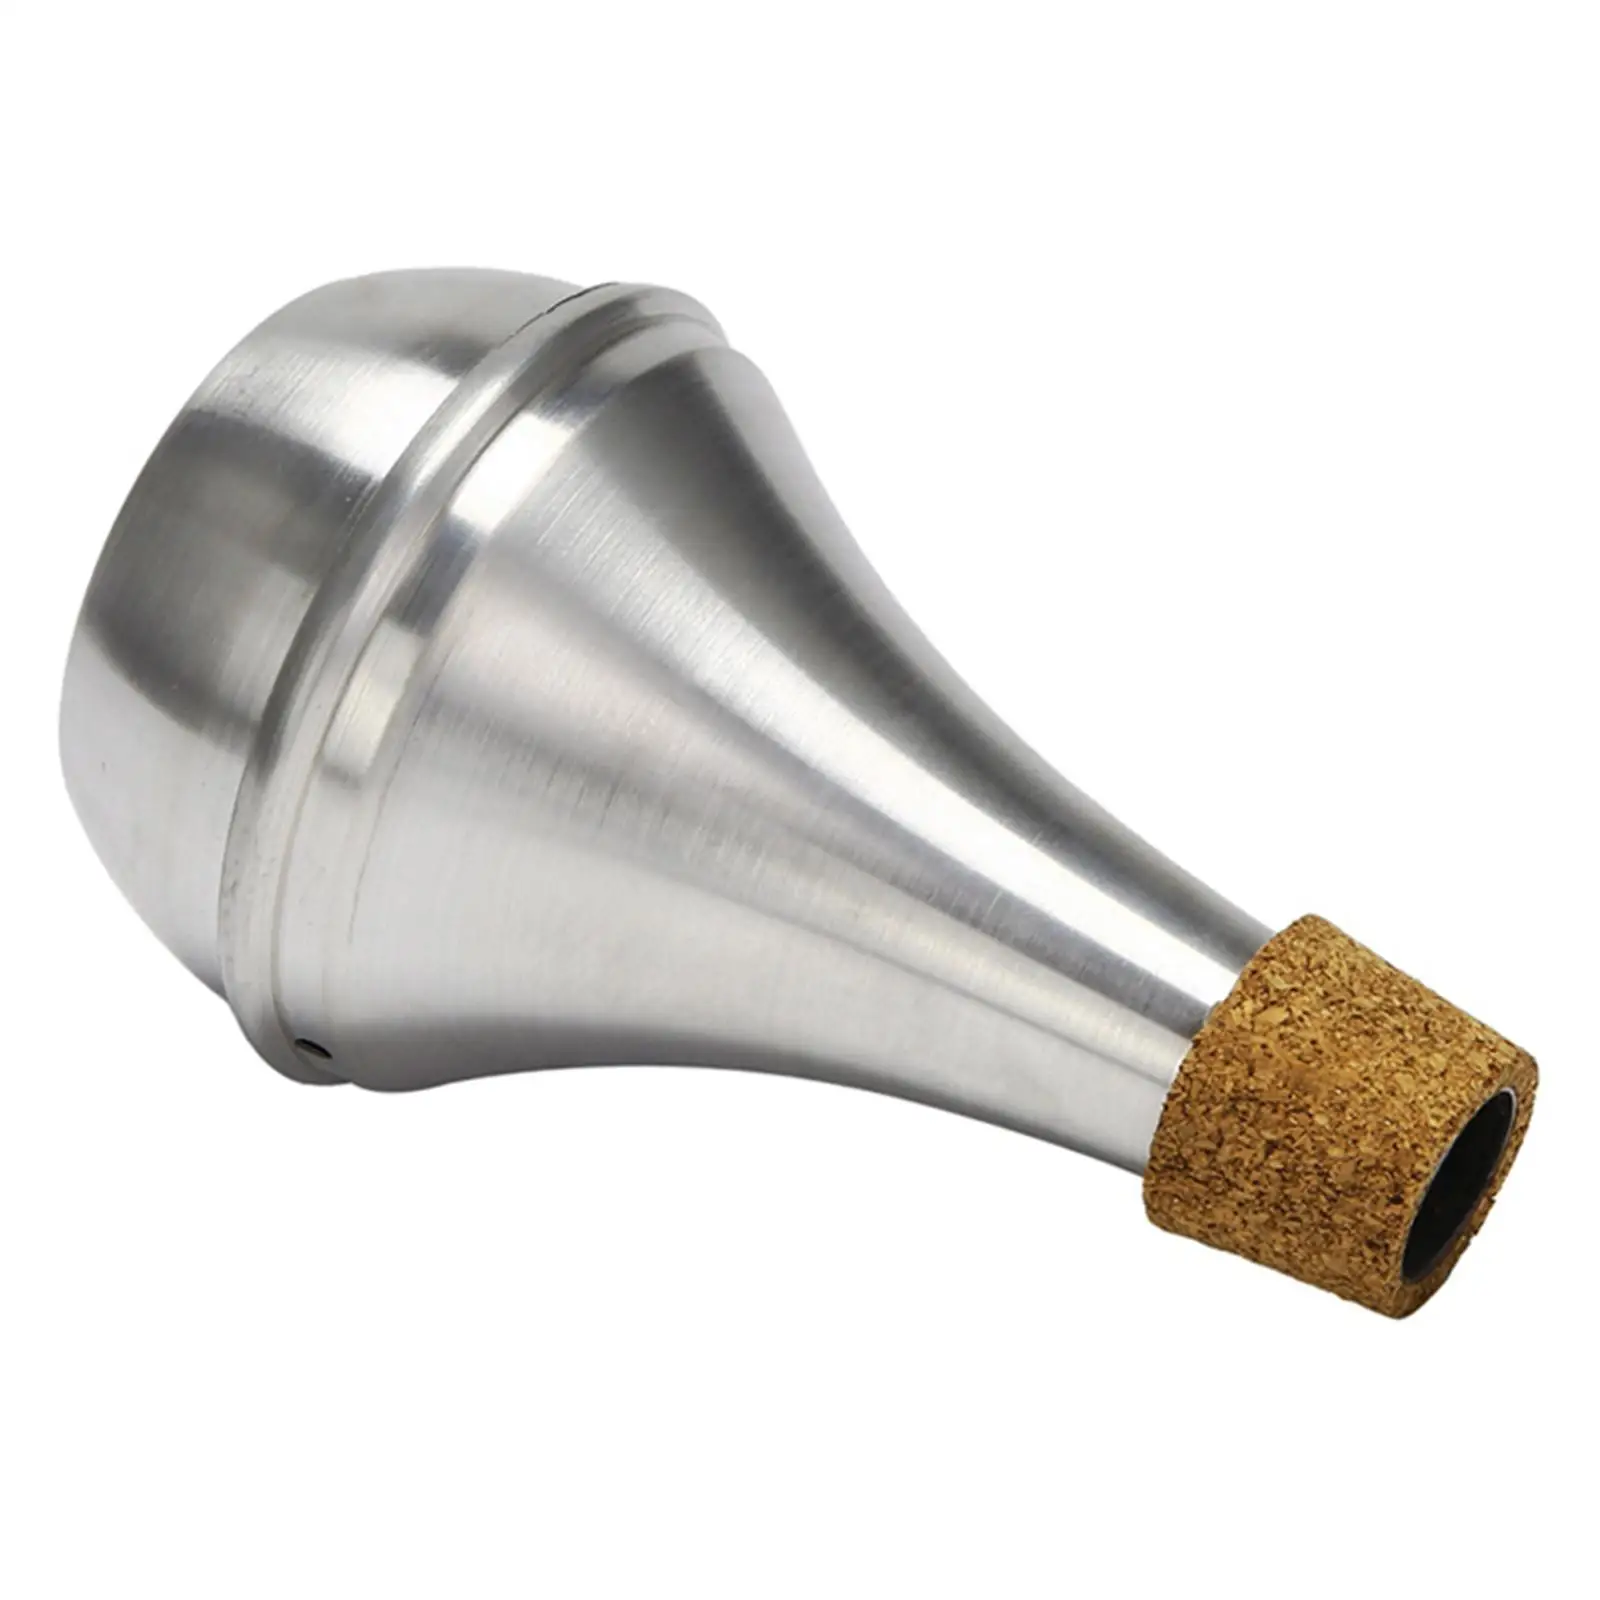 Trumpet Mute Trumpet Tool Music Instrument Accessories for Stage Performance